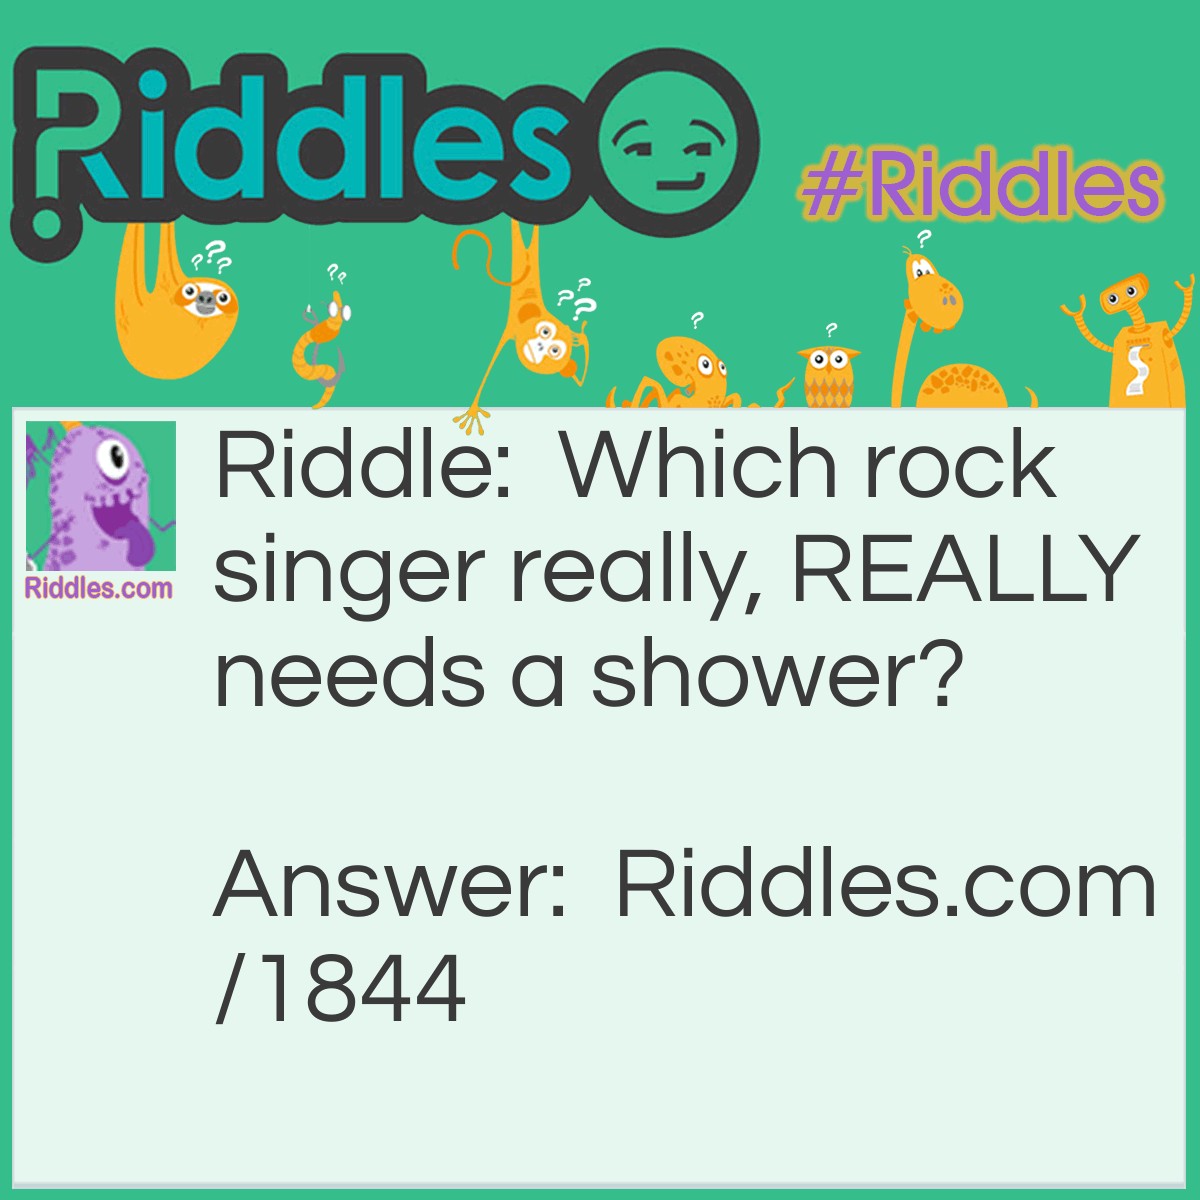 Riddle: Which rock singer really, REALLY needs a shower? Answer: Mud-donna.